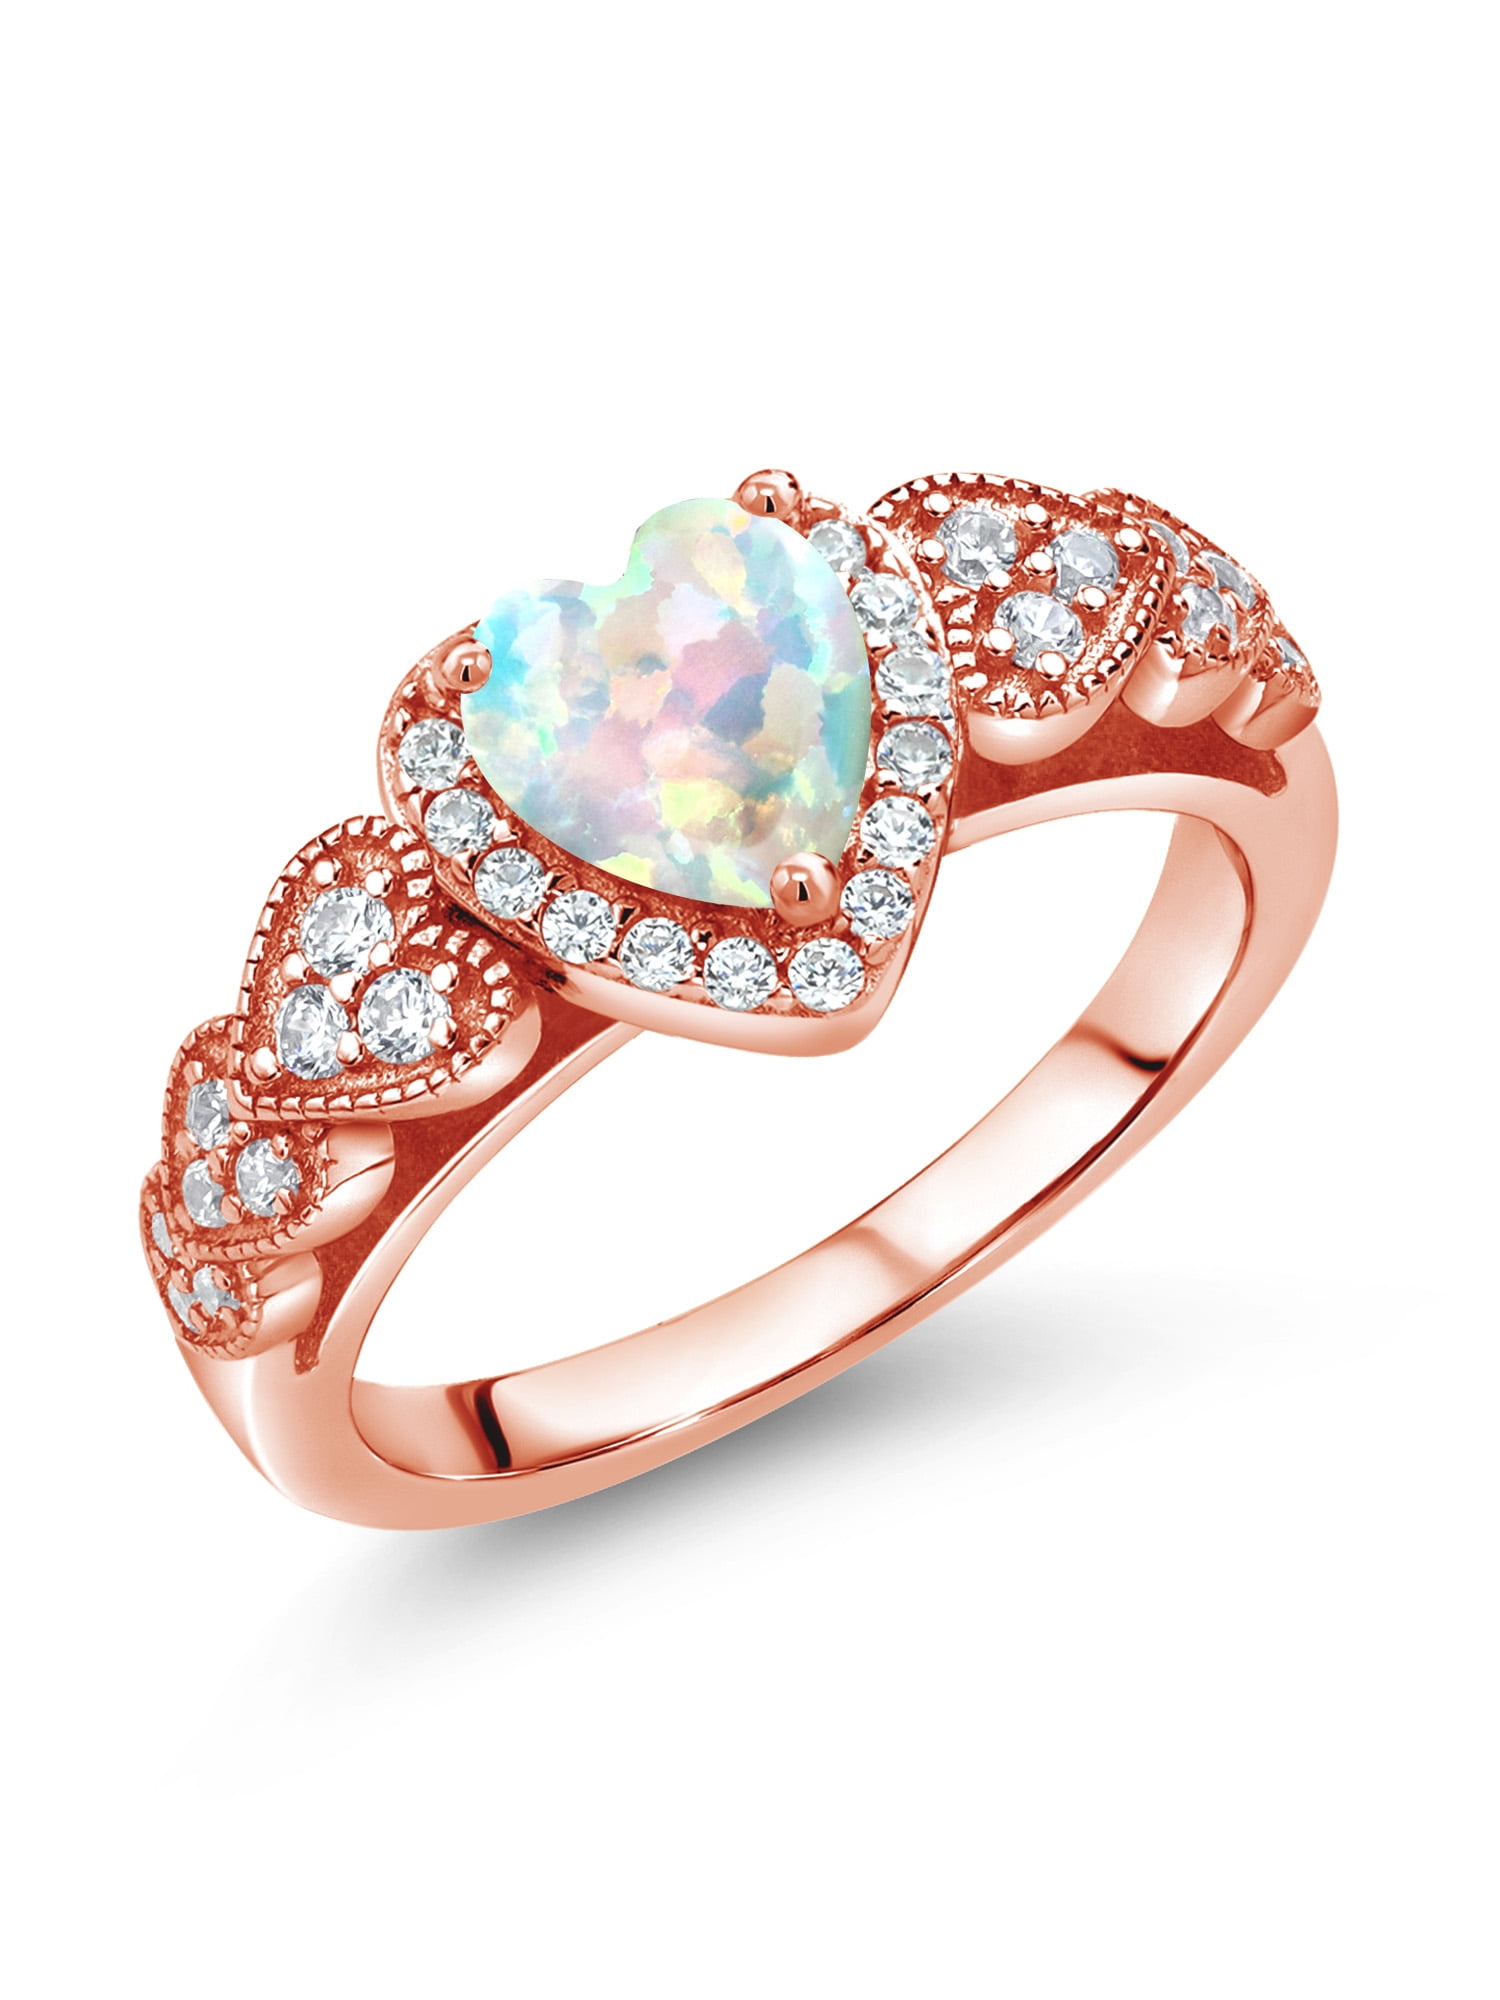 Gem Stone King 18K Rose Gold Plated Silver White Simulated Opal